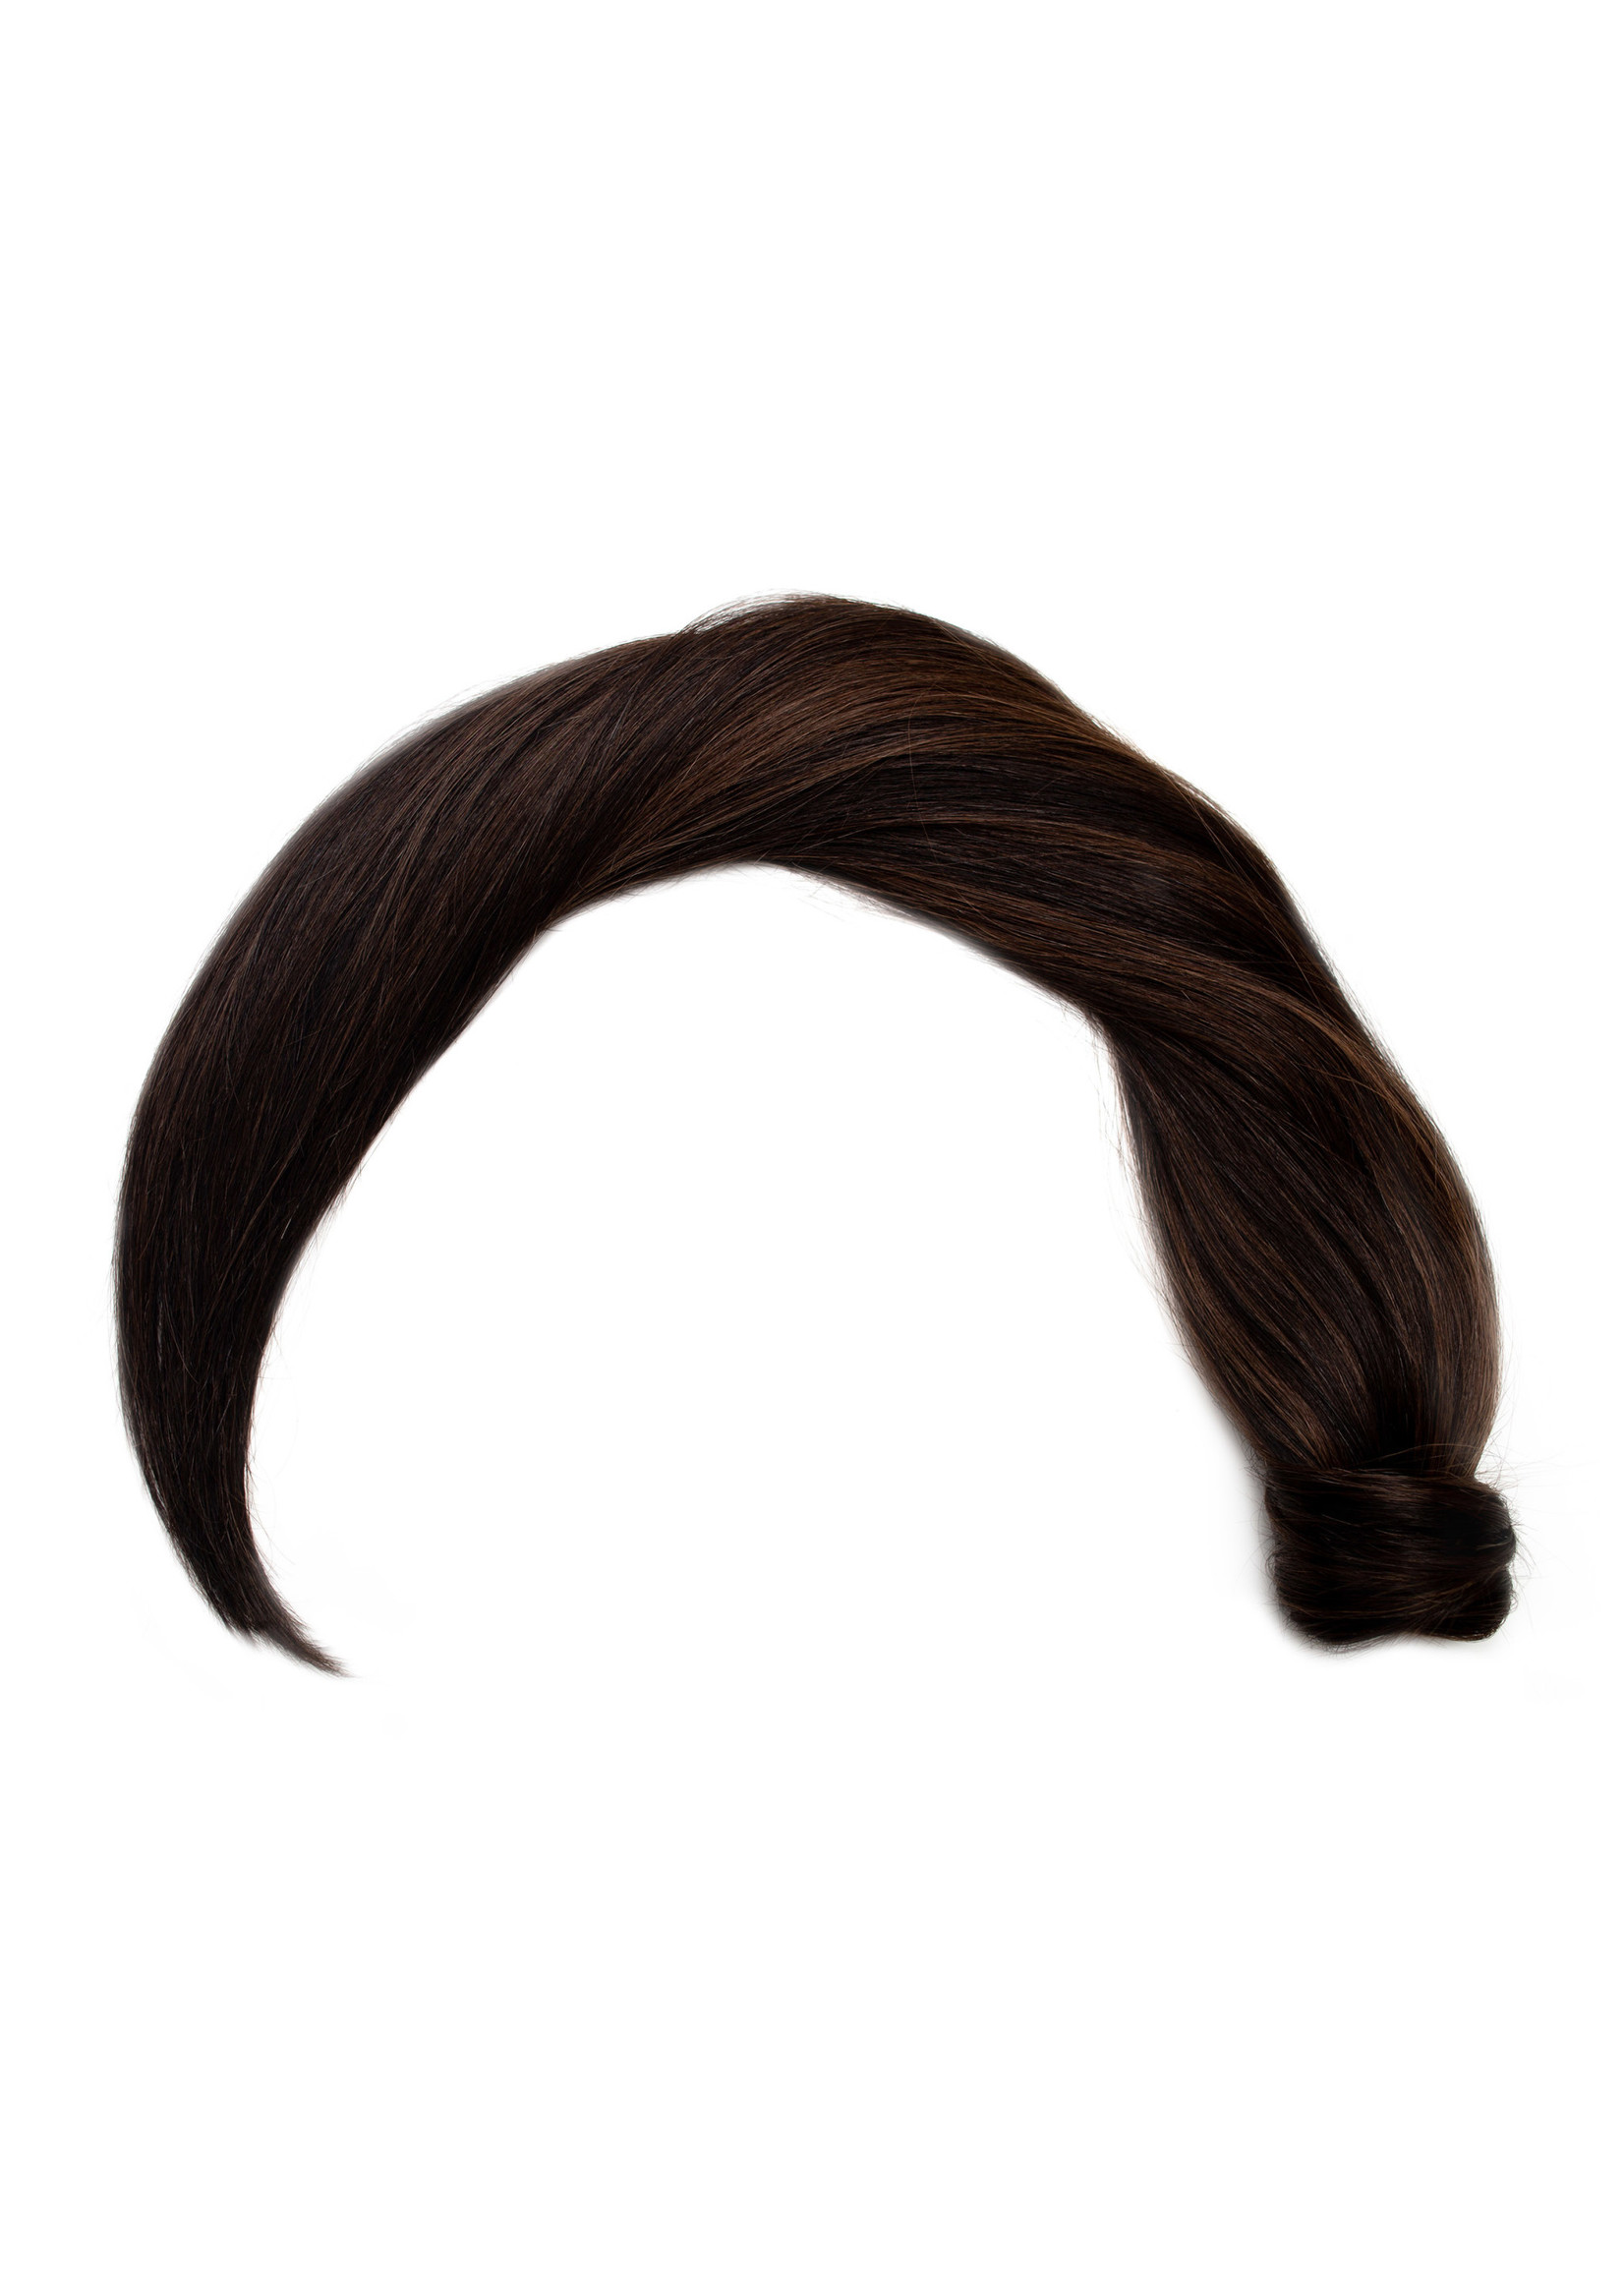 Seamless1 Seamless1 Ponytail Human Hair Extension 21.5 Inches - Ritzy Blend Piano